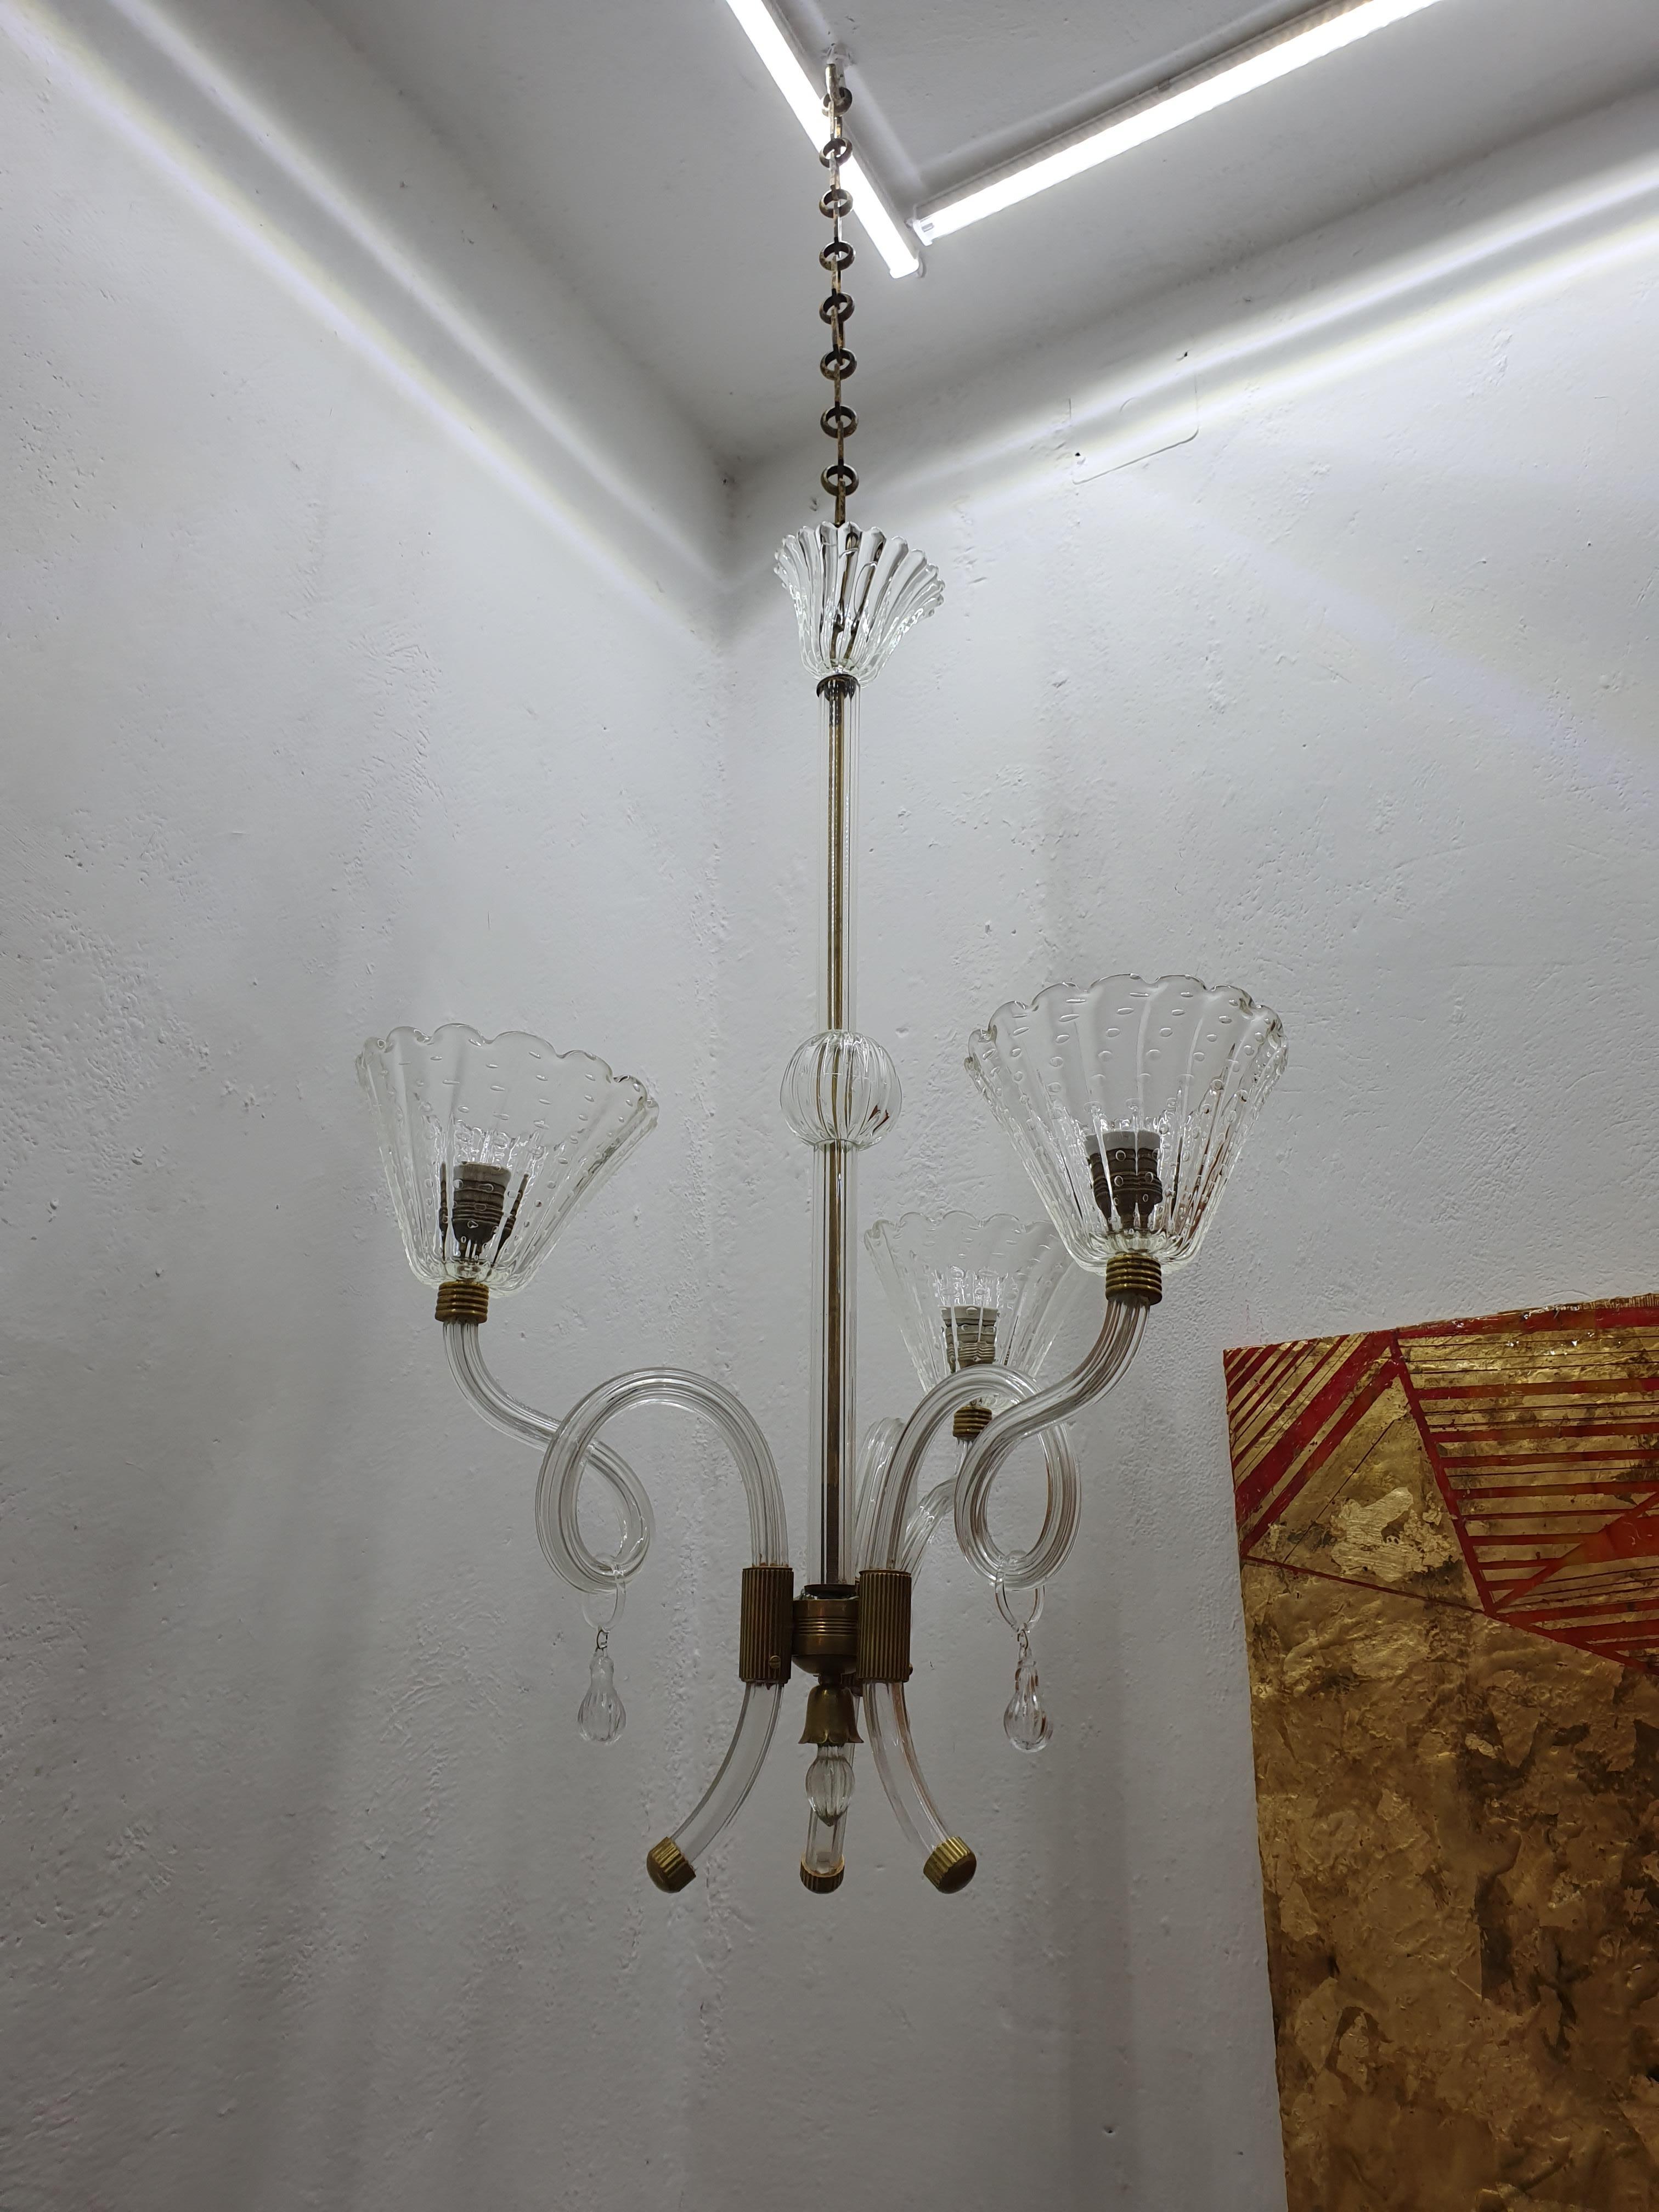 Mid-Century Modern Chandelier by Barovier Toso in Murano Glass, Italy circa 1950 For Sale 7